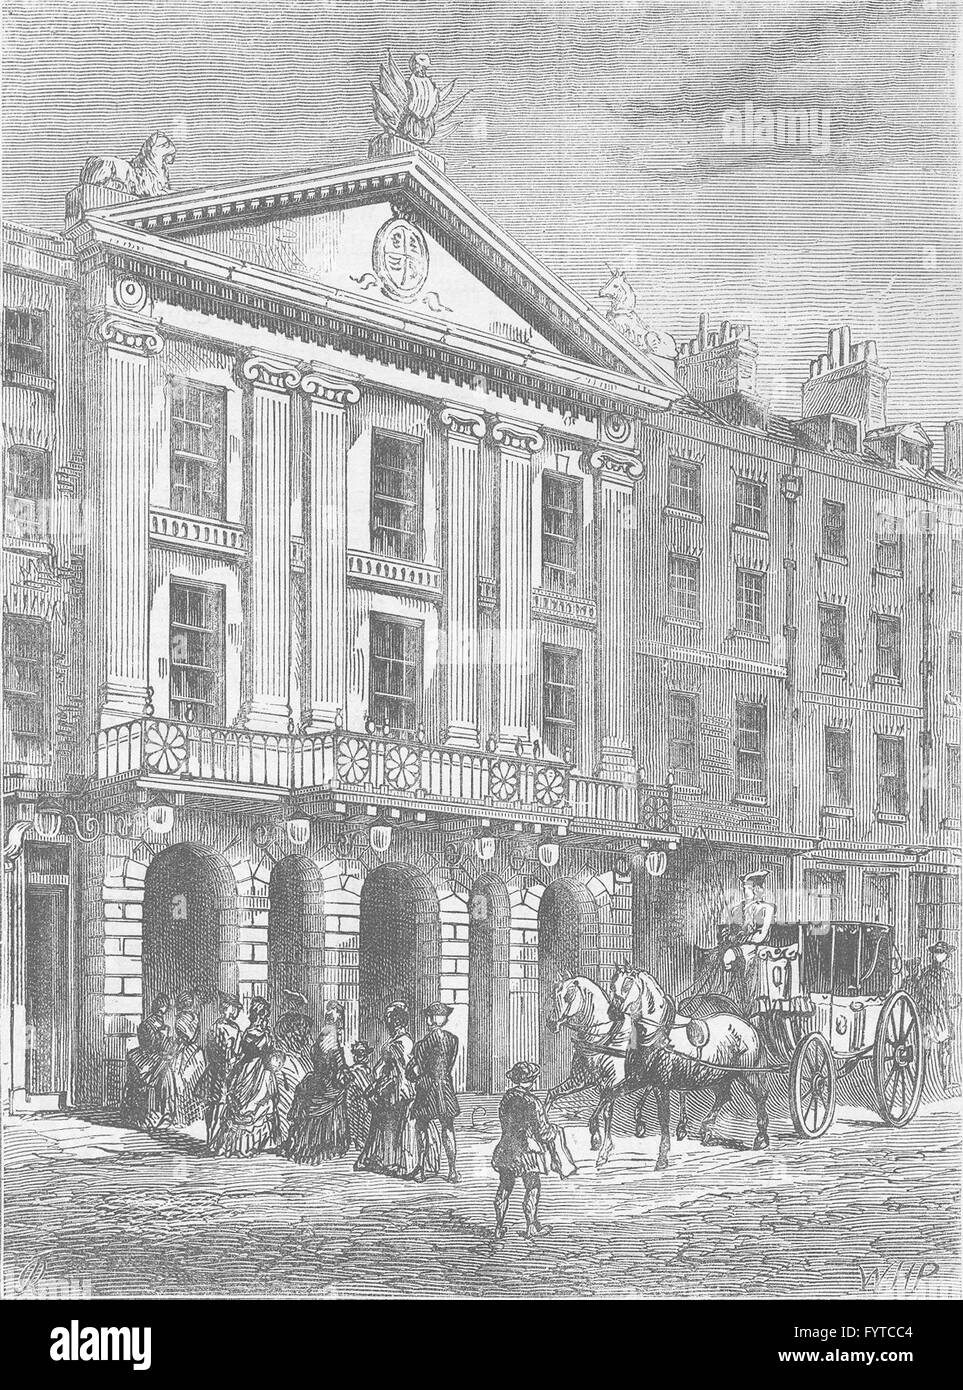 ST.GILES'S-IN-THE-FIELDS PARISH: Front of Old Drury Lane Theatre. London, c1880 Stock Photo